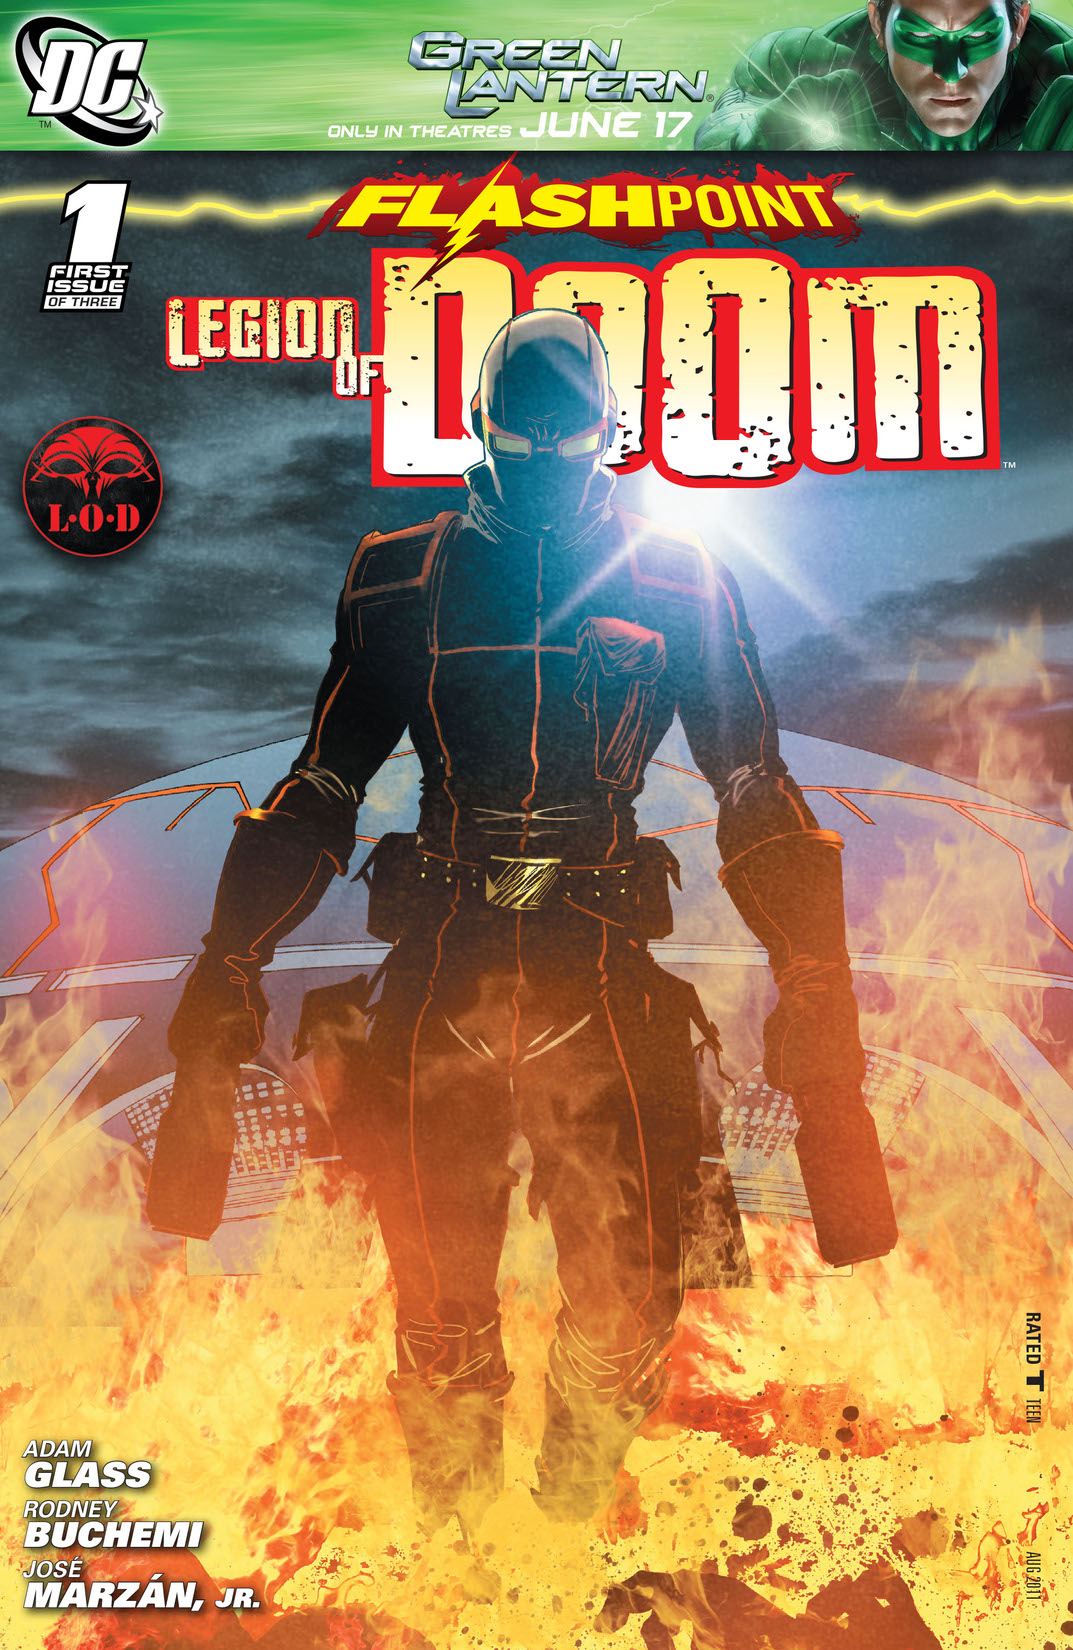 Flashpoint: The Legion of Doom #1 preview images